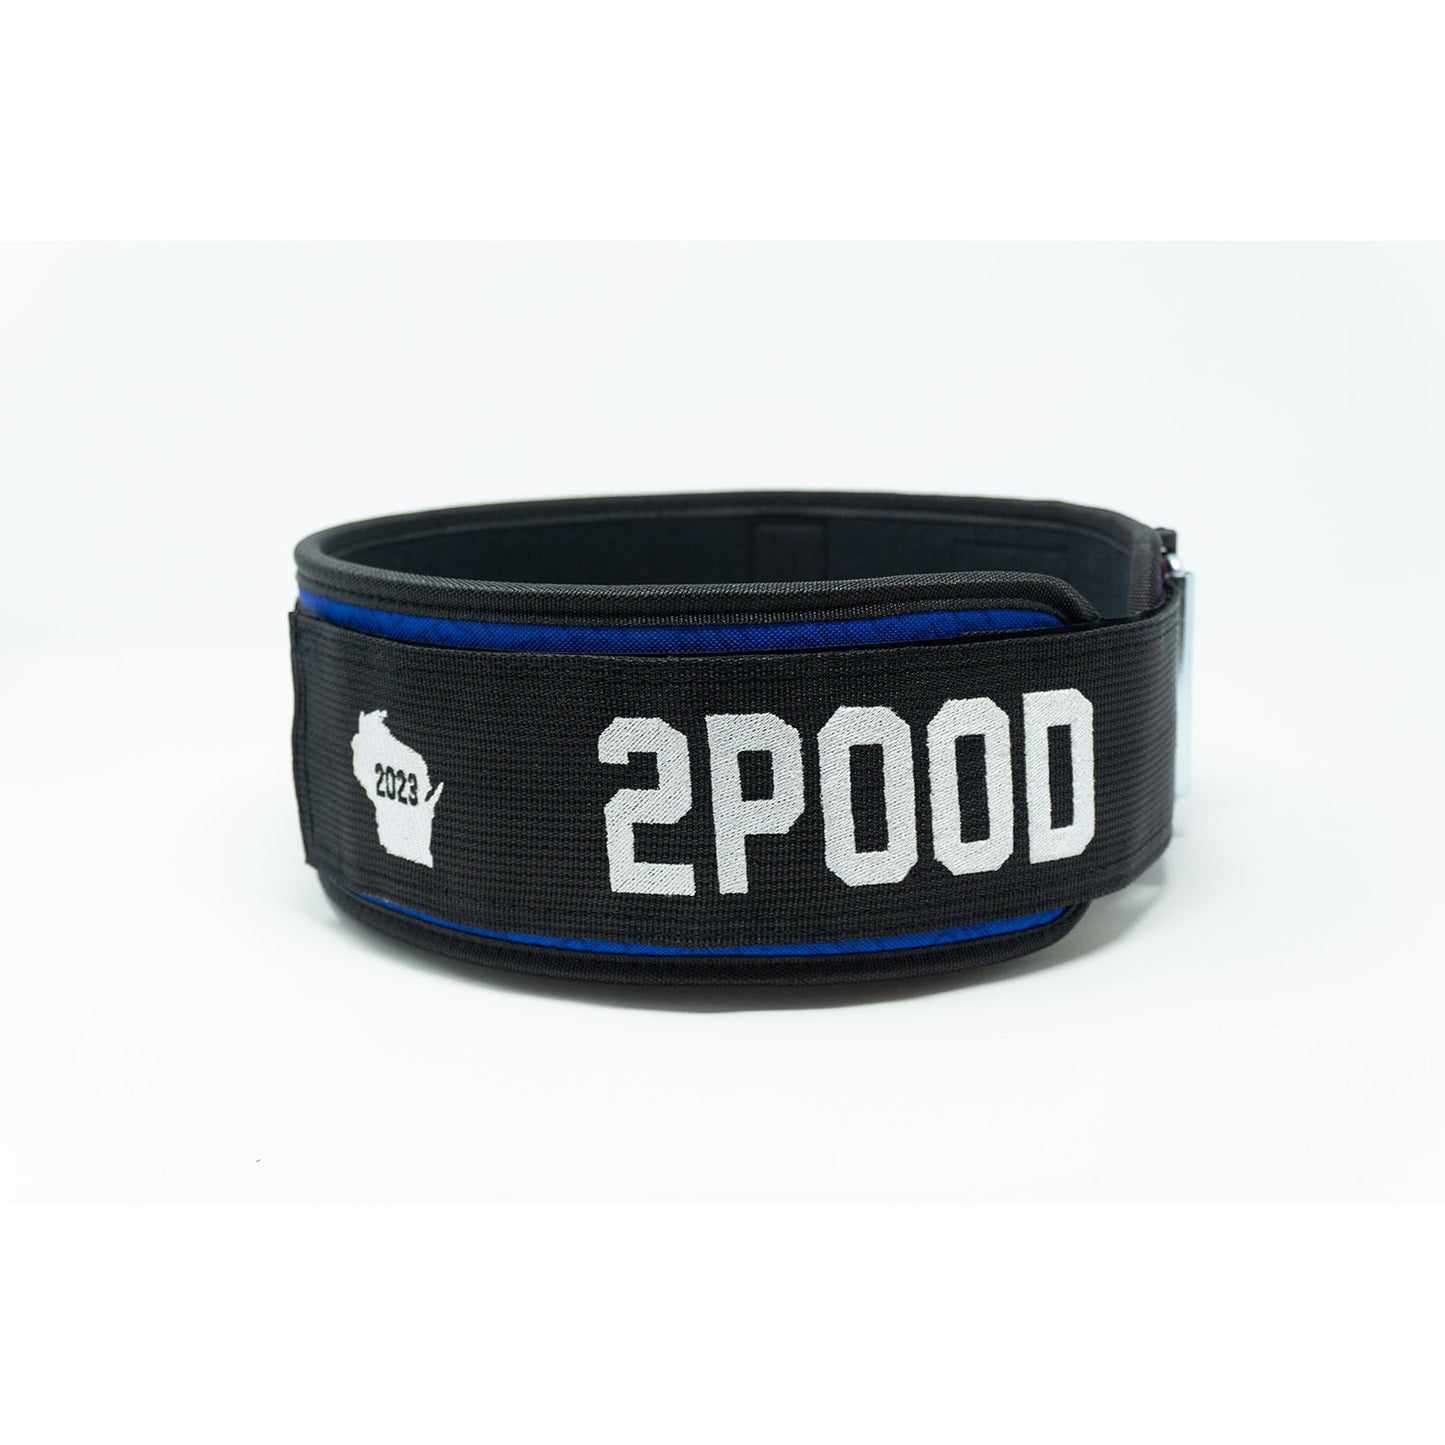 CrossFit Games Edition Weightlifting Belt